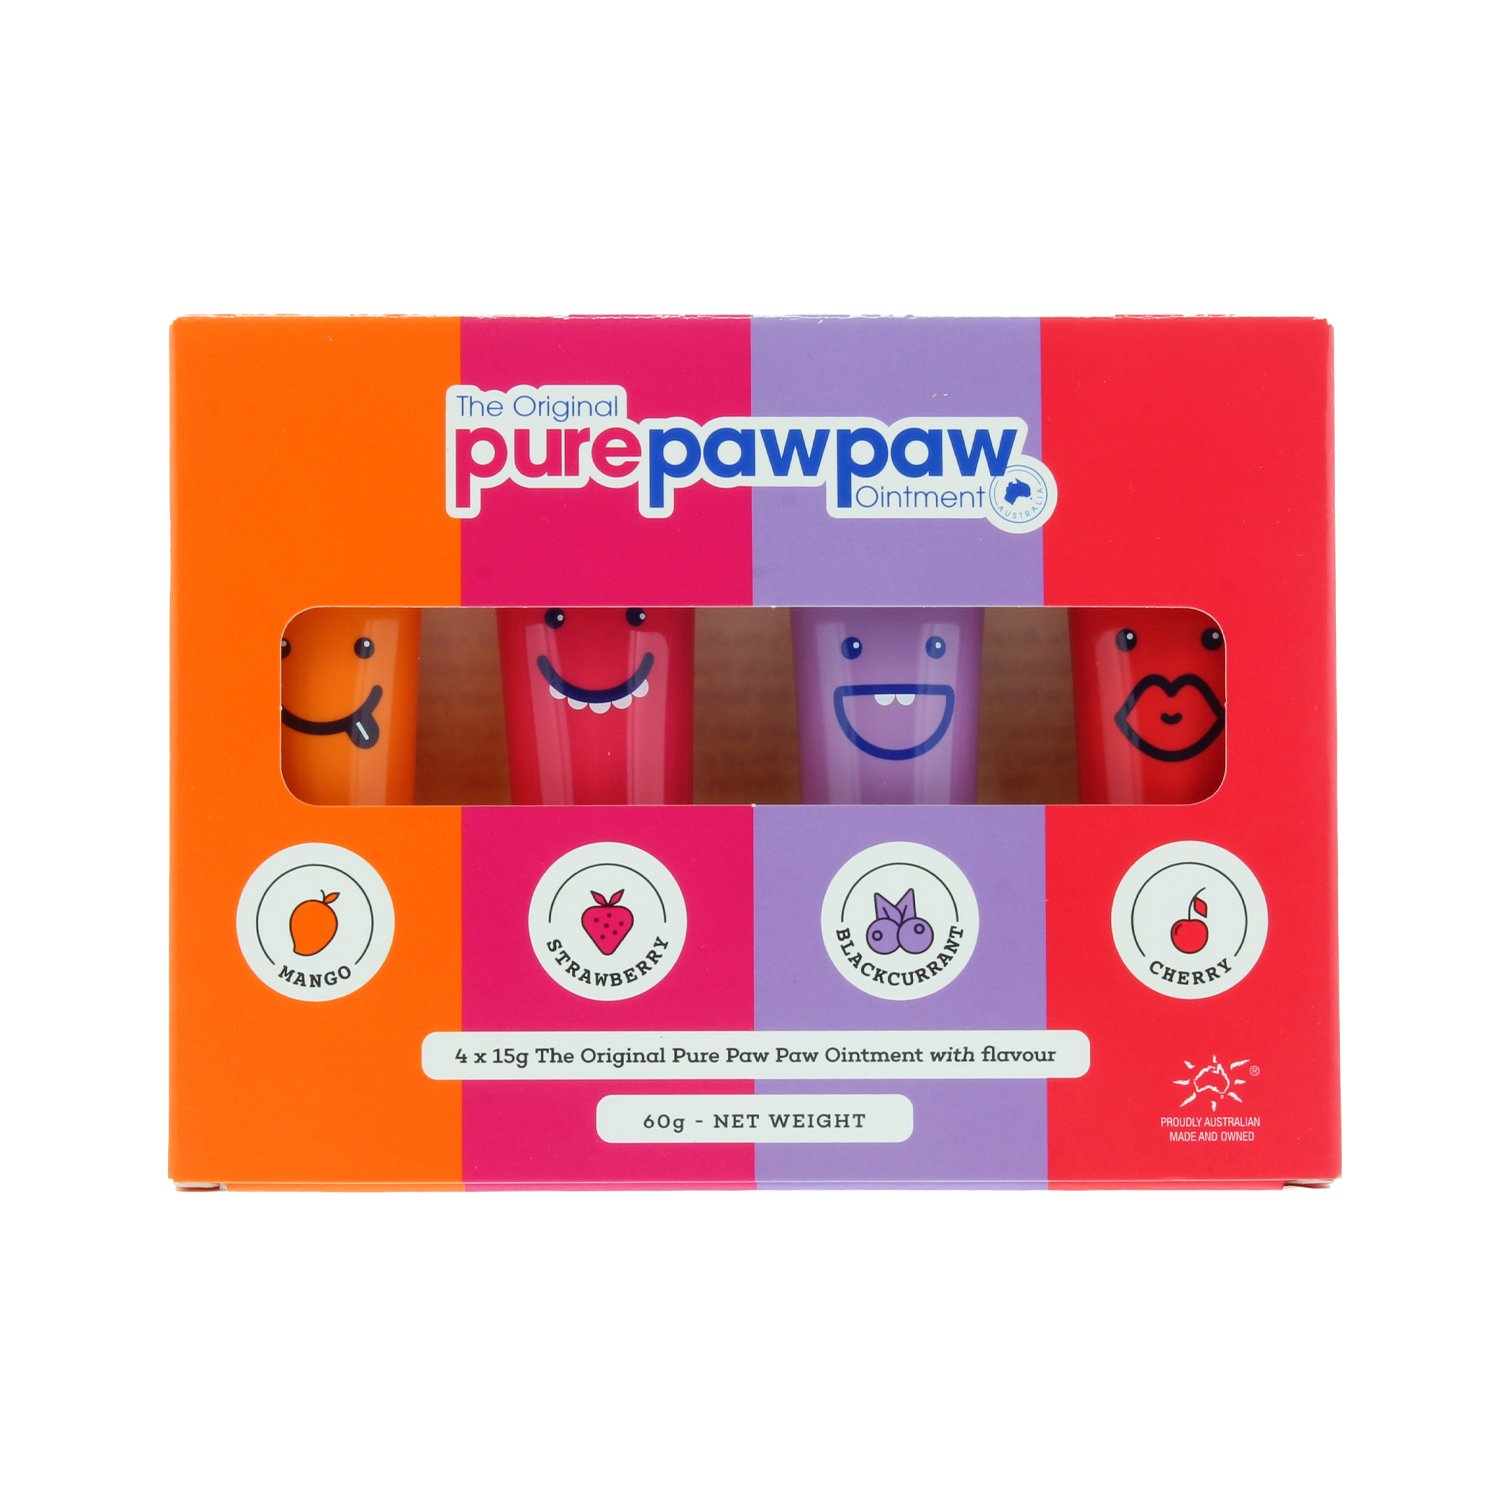 Pure Paw Paw Ointment 4pc Gift Set